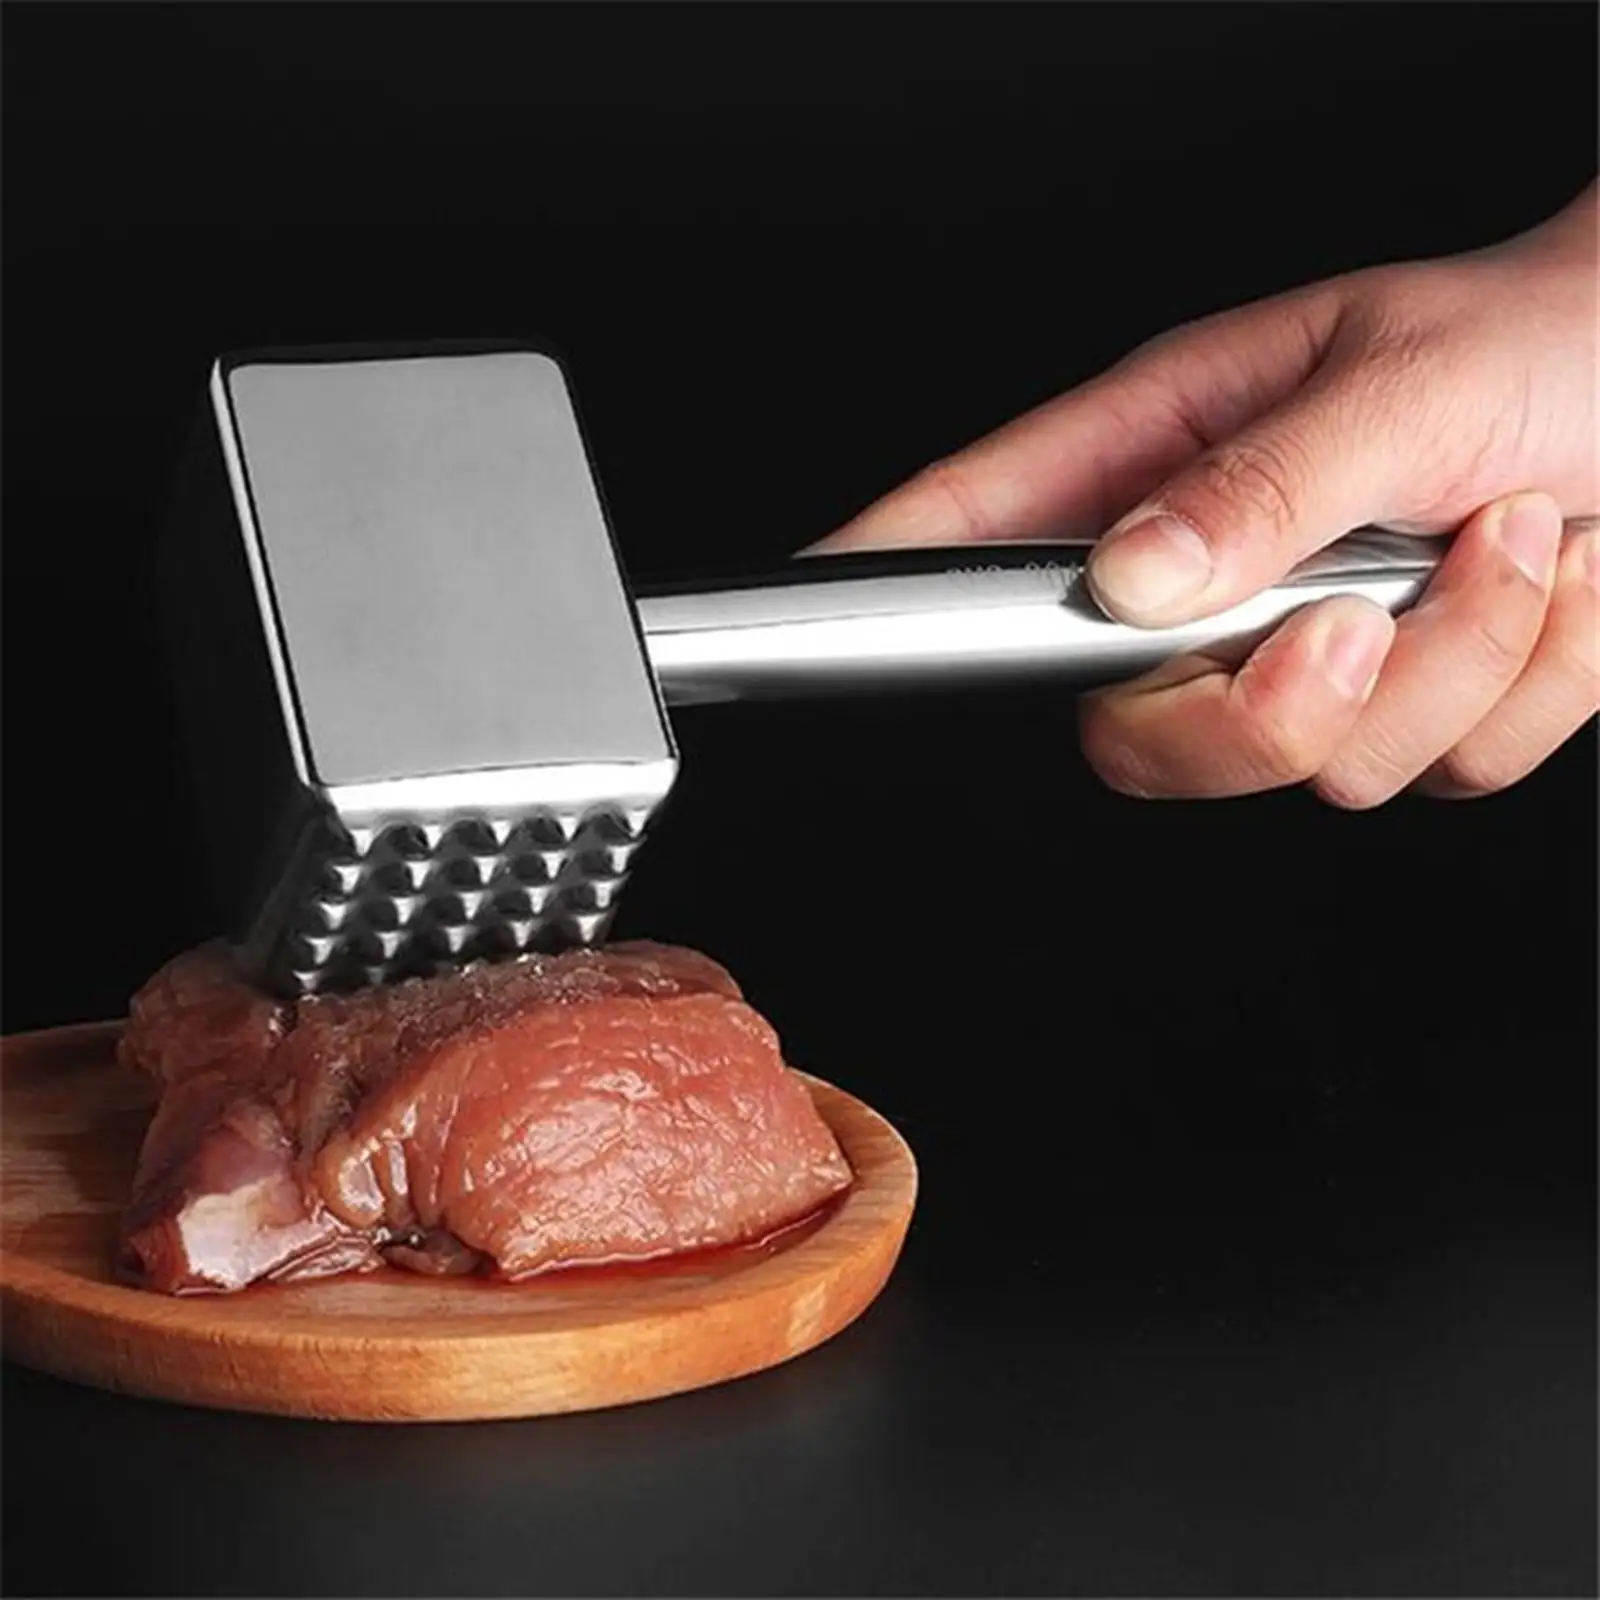 Stainless Steel Meat Mallet Tenderizer for Steak, Chicken, Poultry, Beef